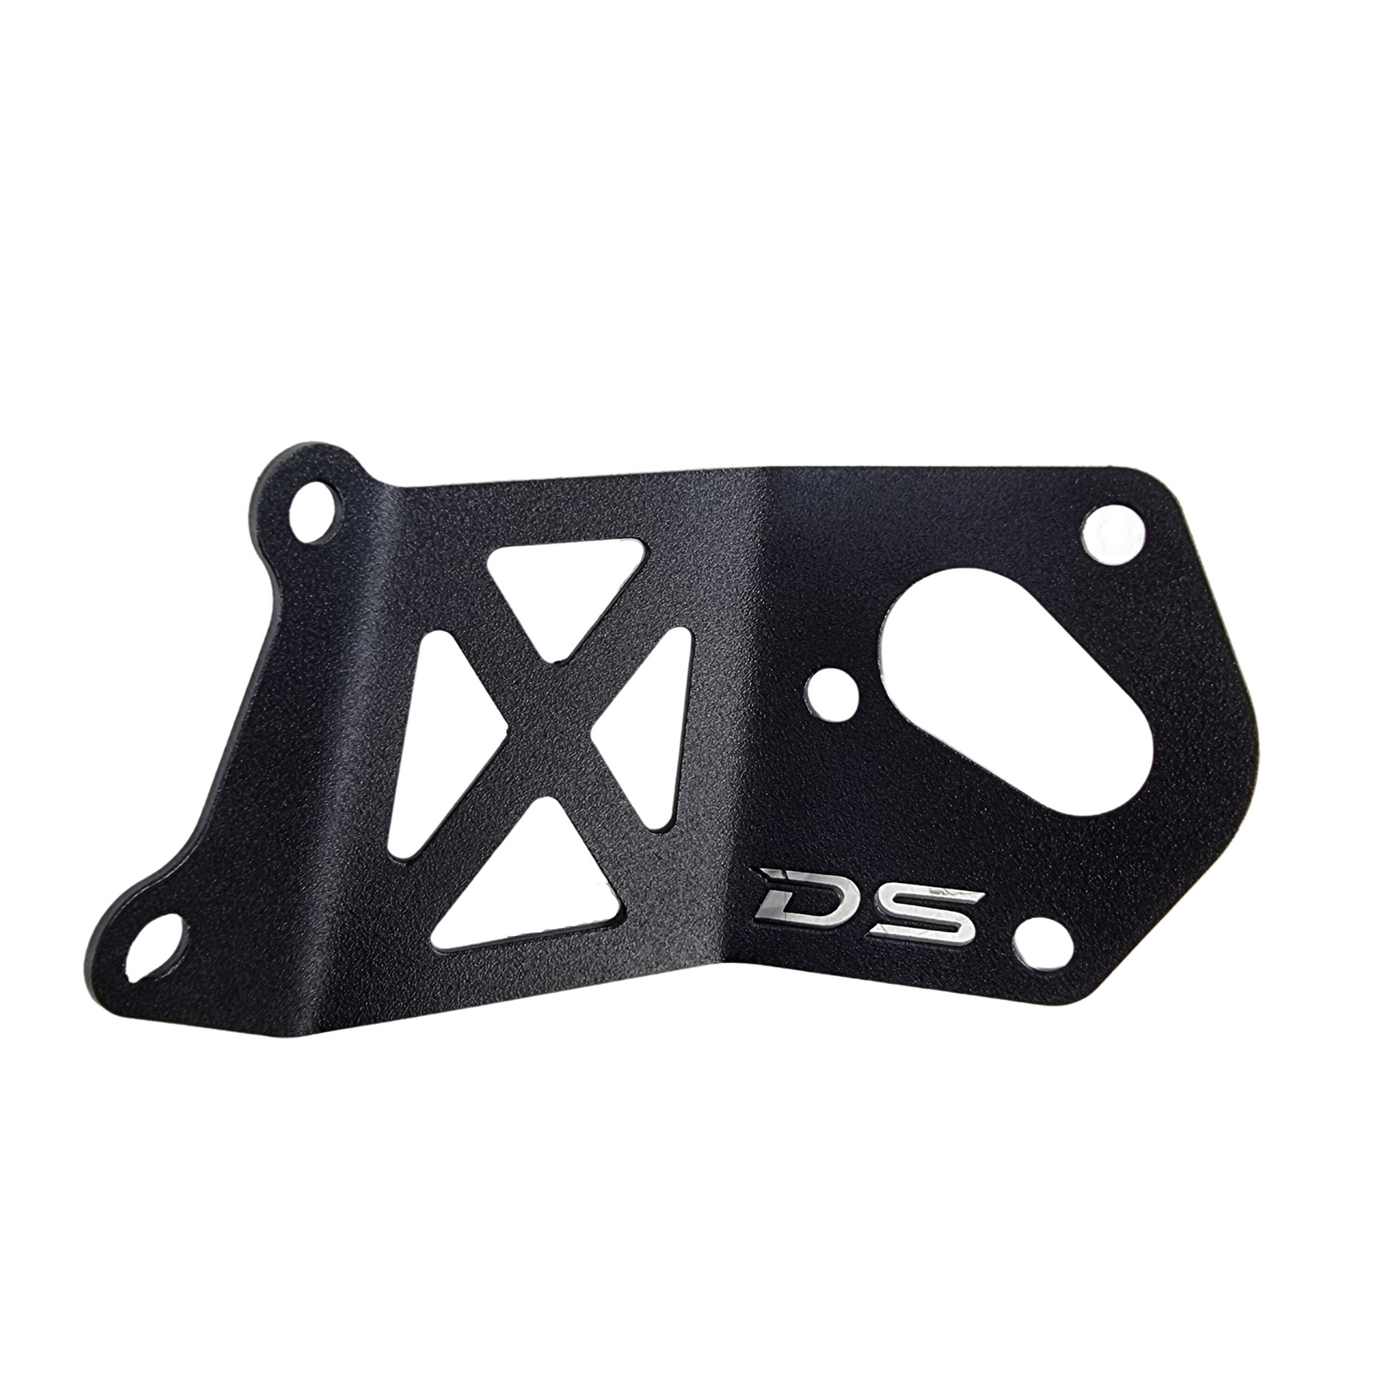 Steering box support brace 1600 510 - must have part